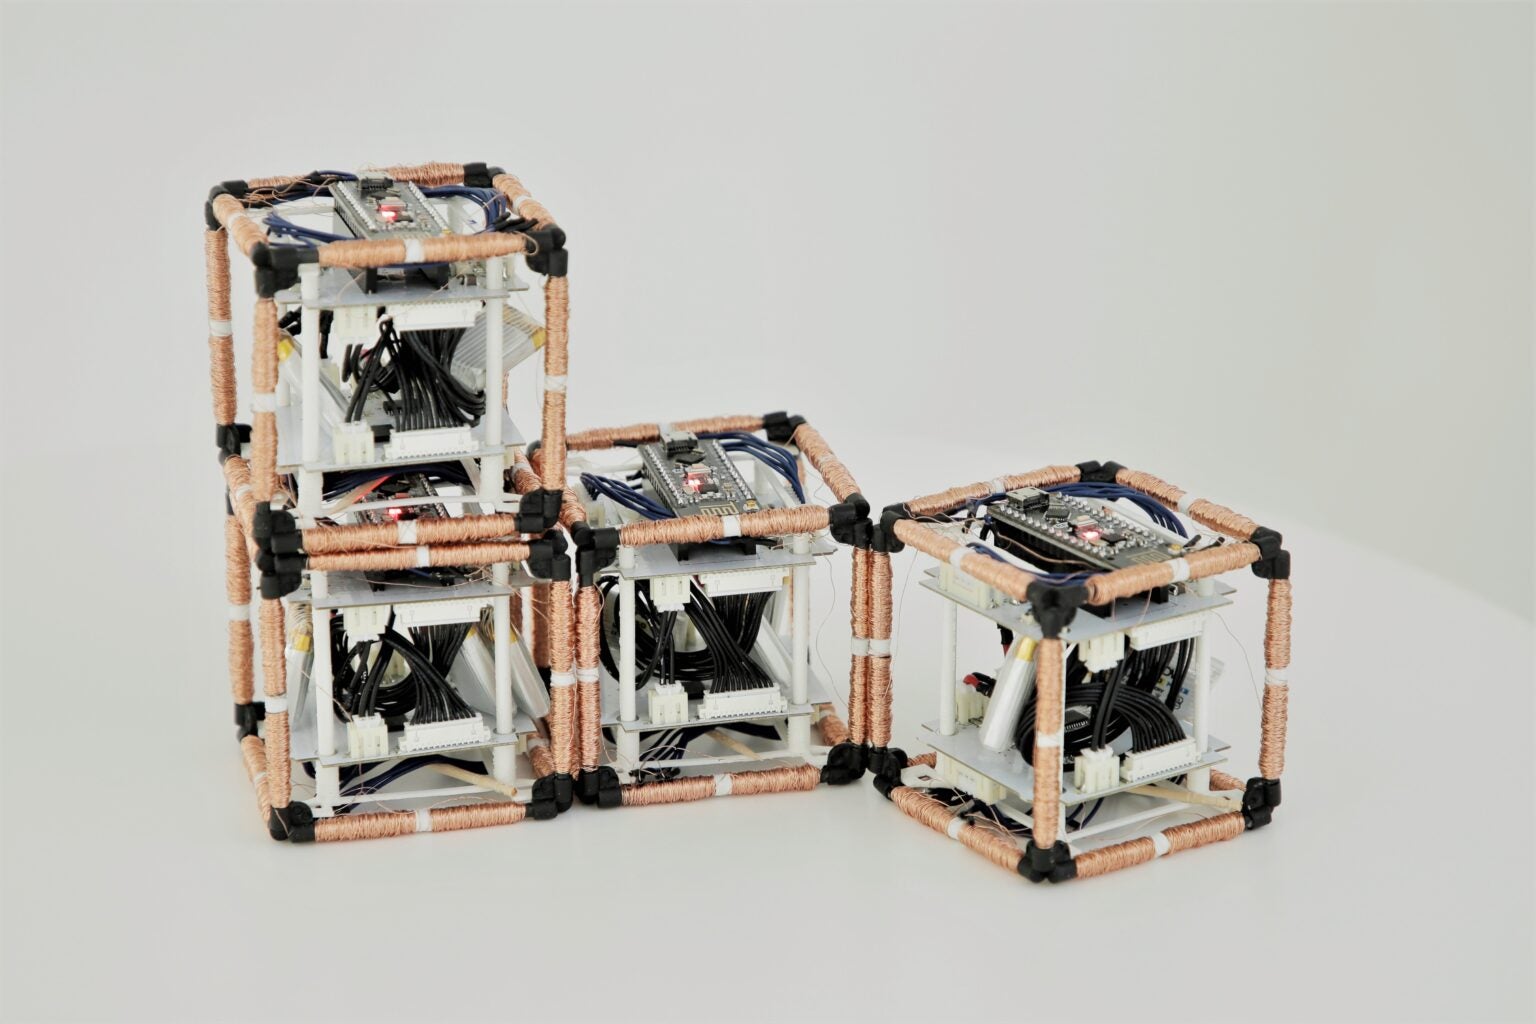 These shape-shifting robots could make for great furniture in space